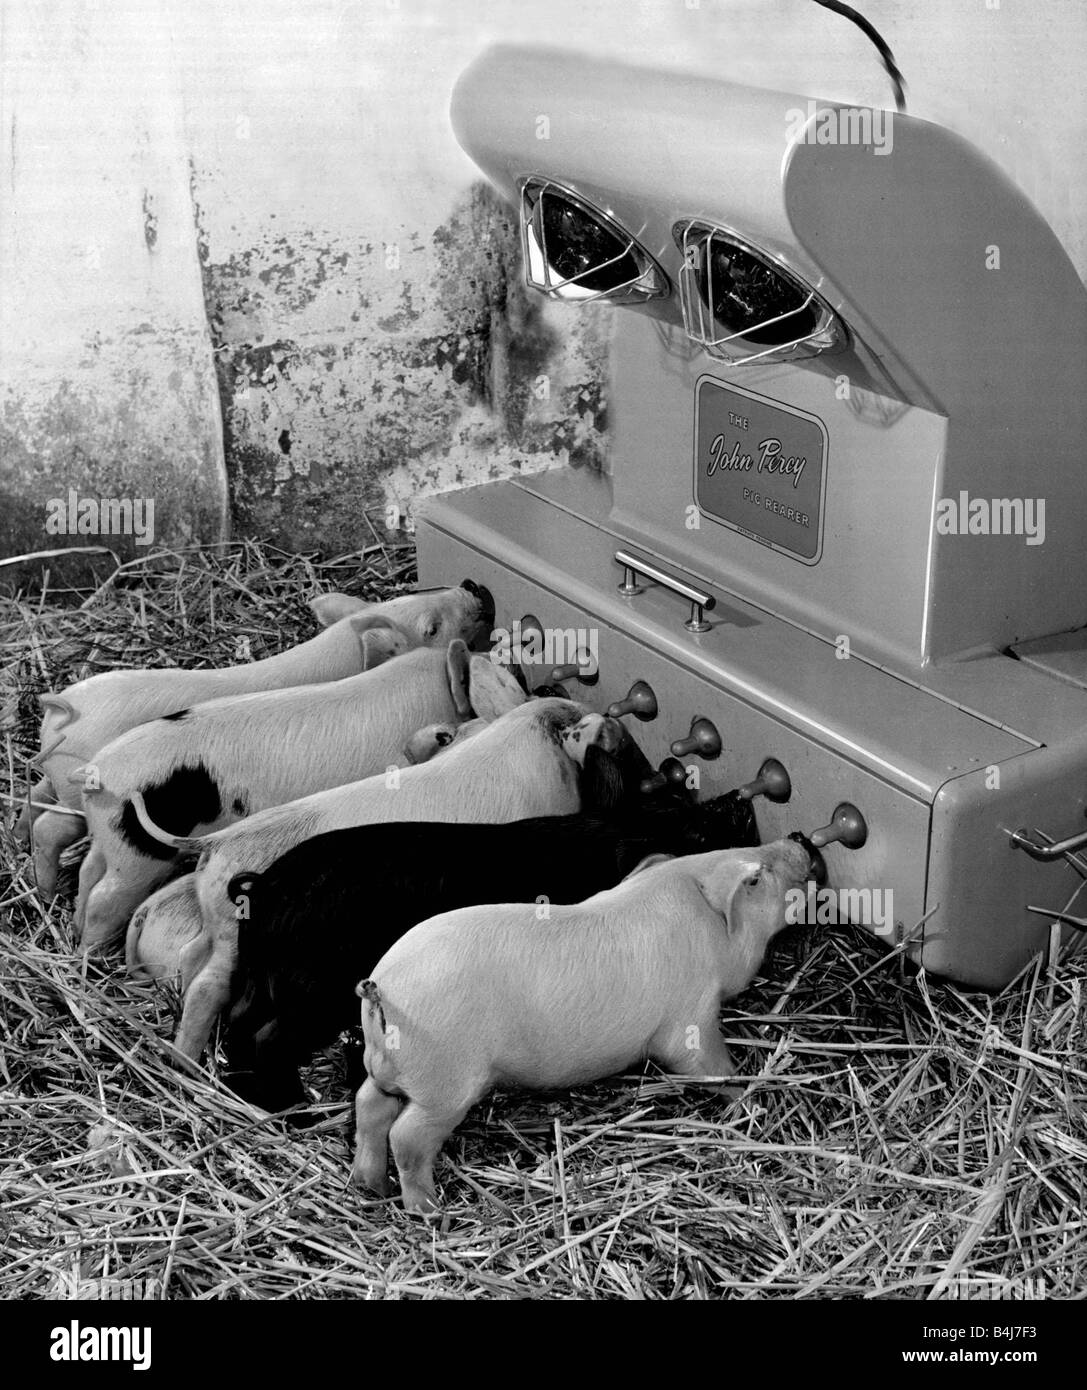 Piglet feeder invented by Mr Perry a farmer The young pigs suck milk through tents whilst infra red lamps warm them July 1953 1950s Stock Photo